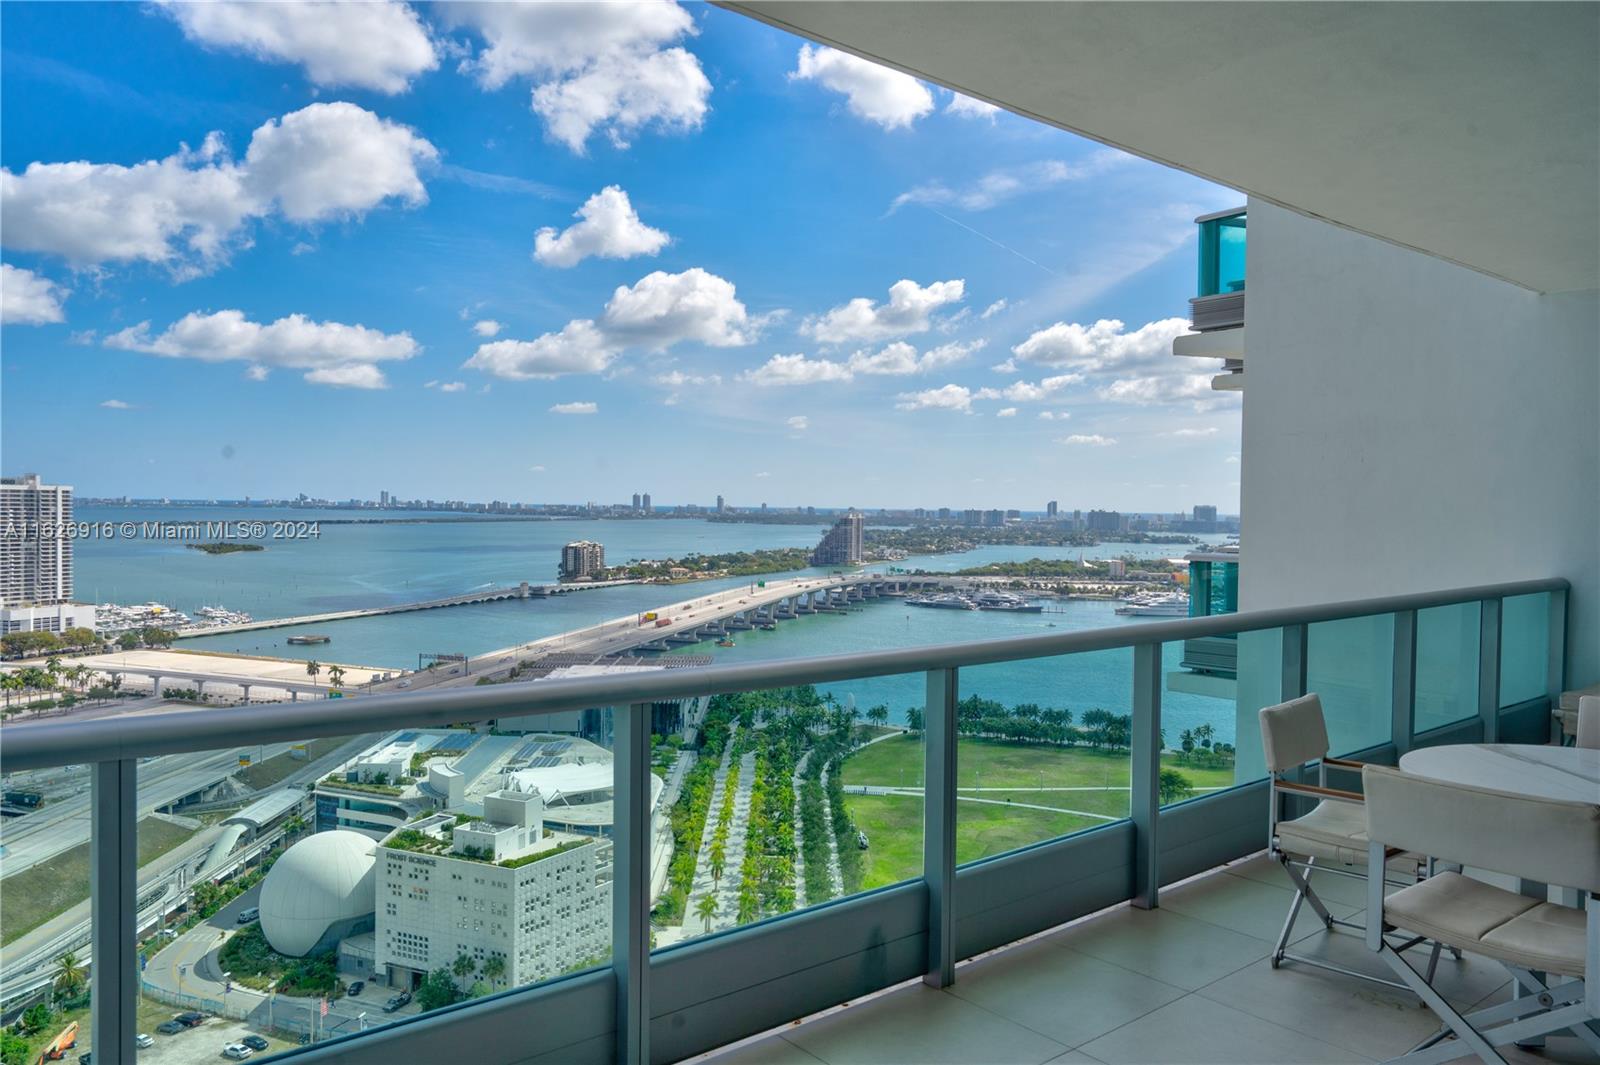 Experience unparalleled luxury in this extraordinary residence at 900 Biscayne Bay. This elegant unit features two bedrooms plus a den and three full bathrooms within a thoughtfully designed split floor plan. Highlights include a private elevator lobby with double entry doors and a spacious 10' x 38' terrace. The master bathroom is a sanctuary with a shower, bathtub, and dual-sink countertop. Indulge in world-class amenities such as two opulent swimming pools, a Jacuzzi, a BBQ area, a cutting-edge fitness center, a chic party room and library, a serene spa, a 35-person movie theater, a children's room, valet parking, and dedicated on-site security and concierge services. Available from Sep 16th, 2024.  Embrace a lifestyle of sophistication and comfort at 900 Biscayne Bay. UNFURNSIHED UNIT